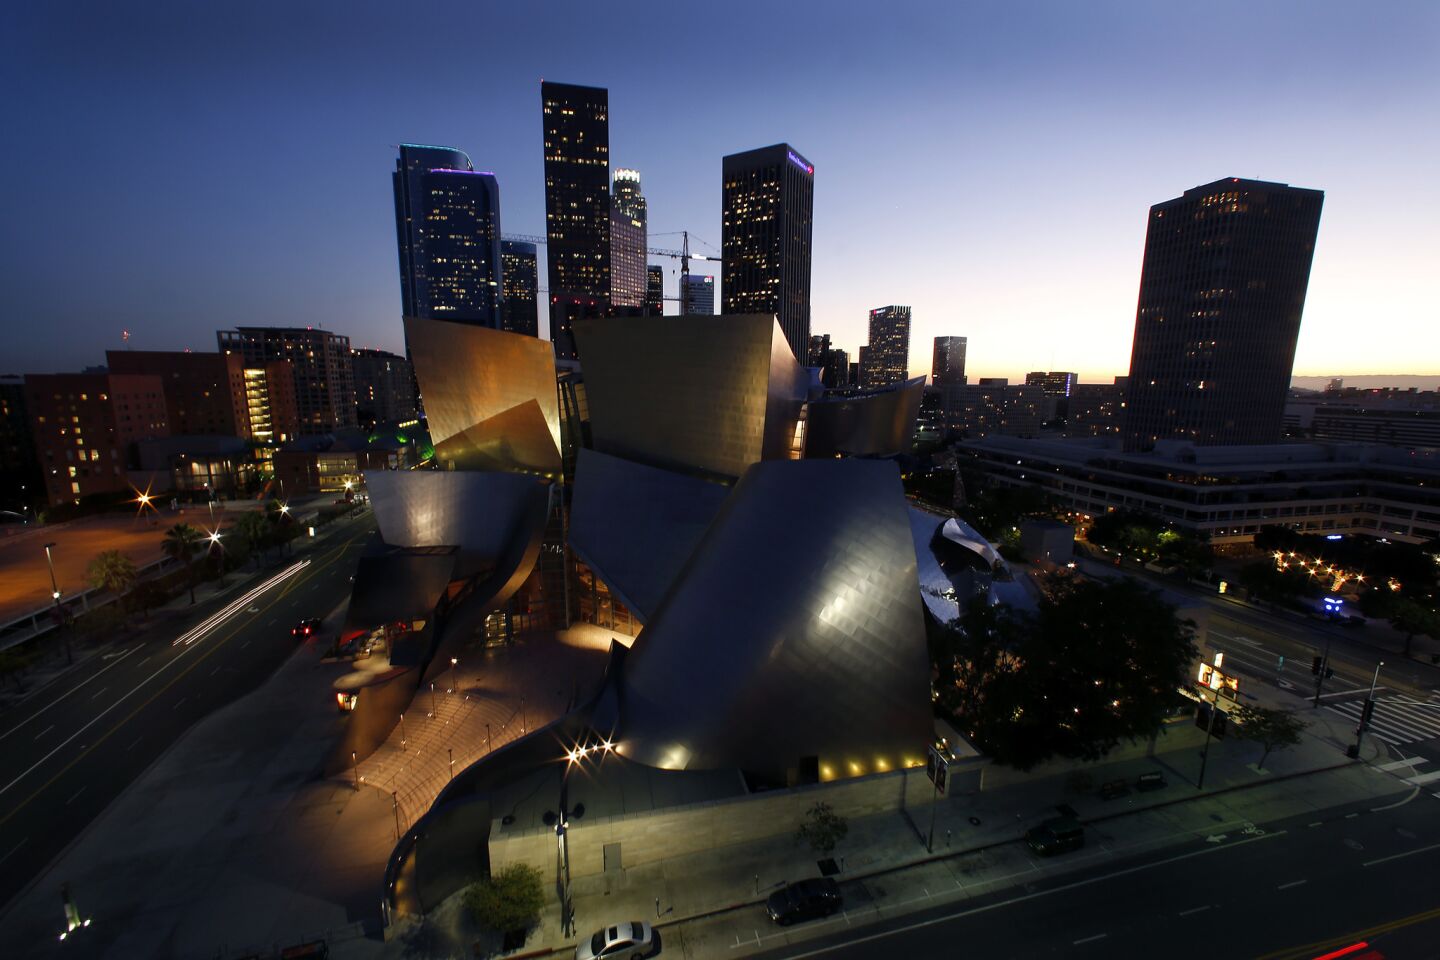 Walt Disney Concert Hall, right, and the site of the proposed development, left.